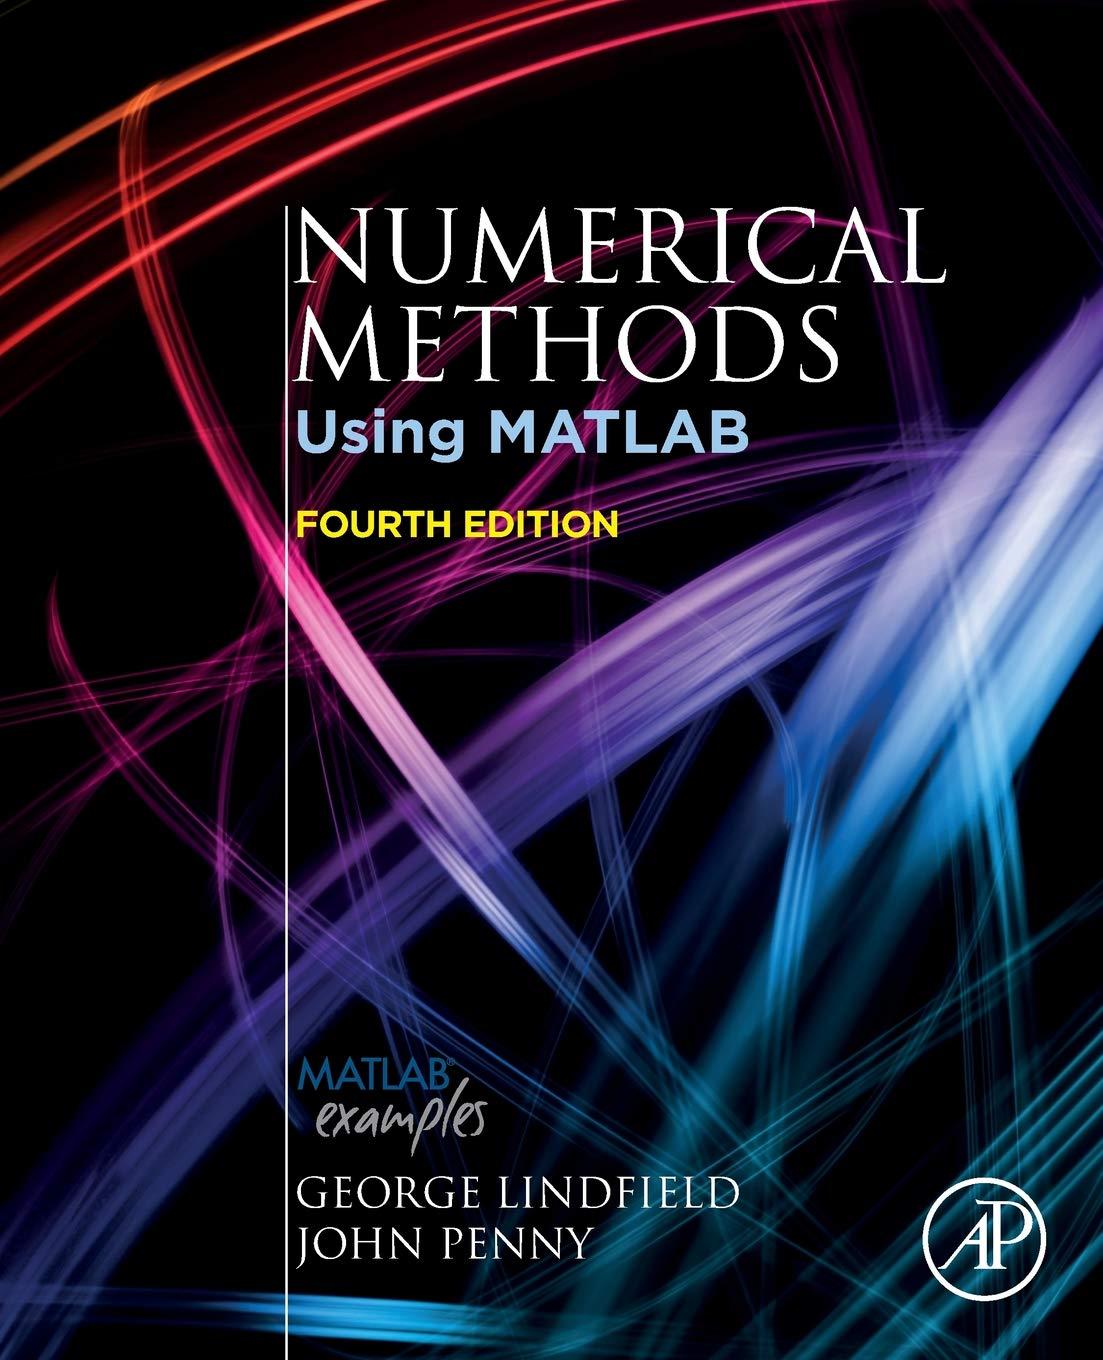 numerical methods using matlab 4th edition george lindfield, john penny 0128122560, 9780128122563